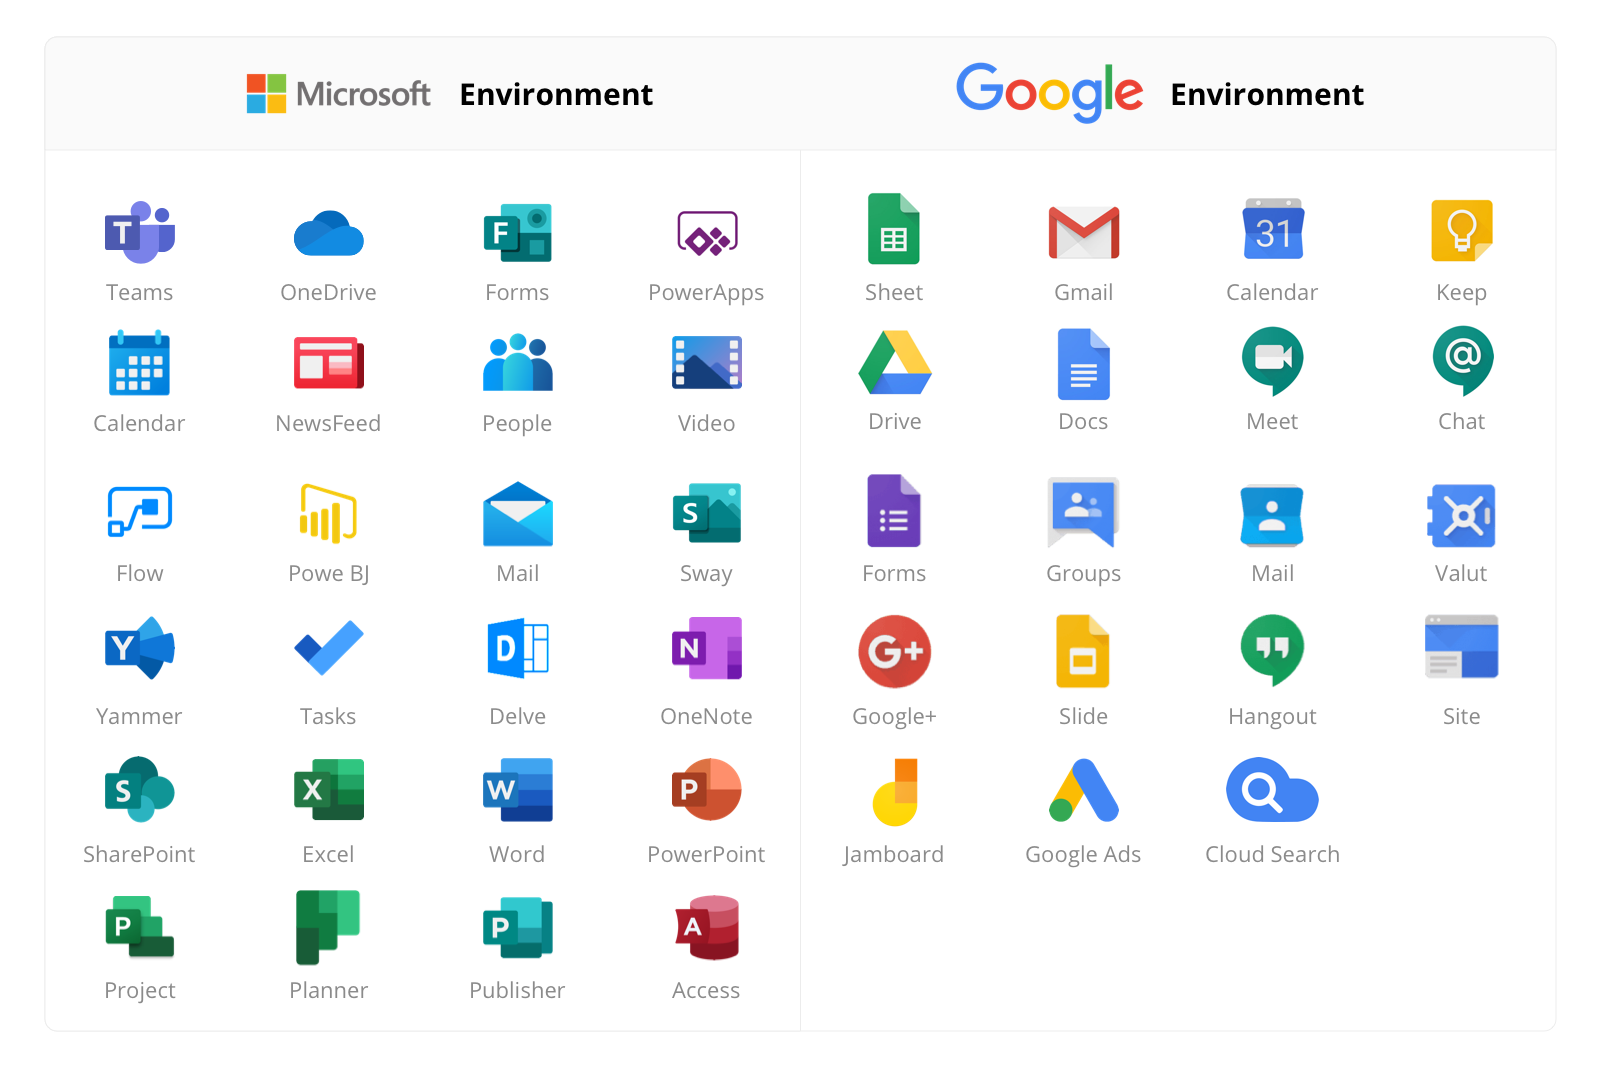 Google and Microsoft stack of tools